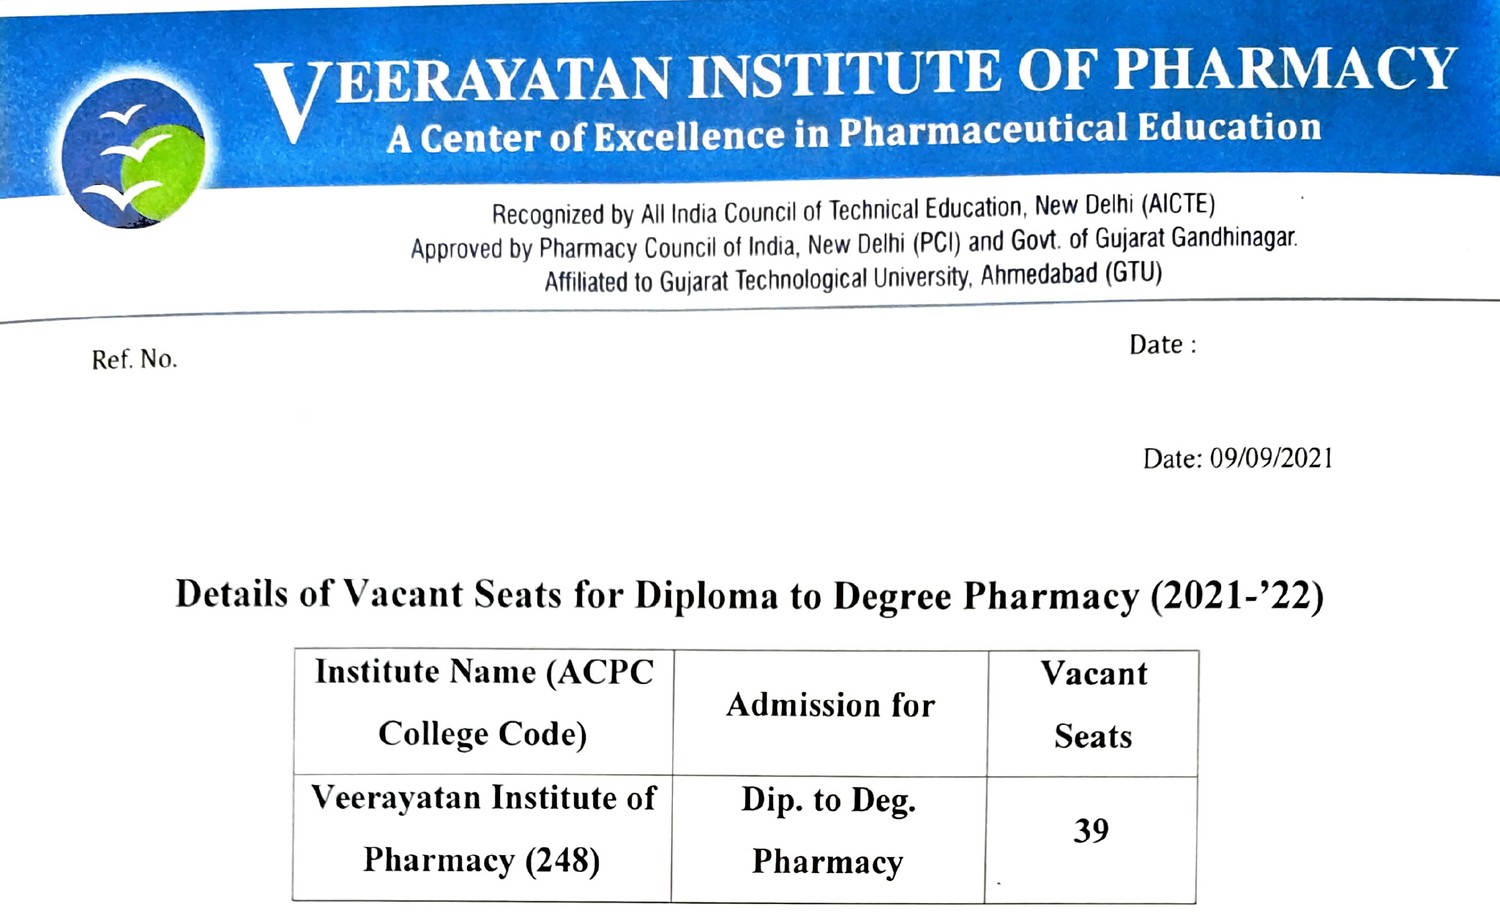 Vacant Seats Admission Schedule for Diploma to Degree Pharmacy  2021- 22